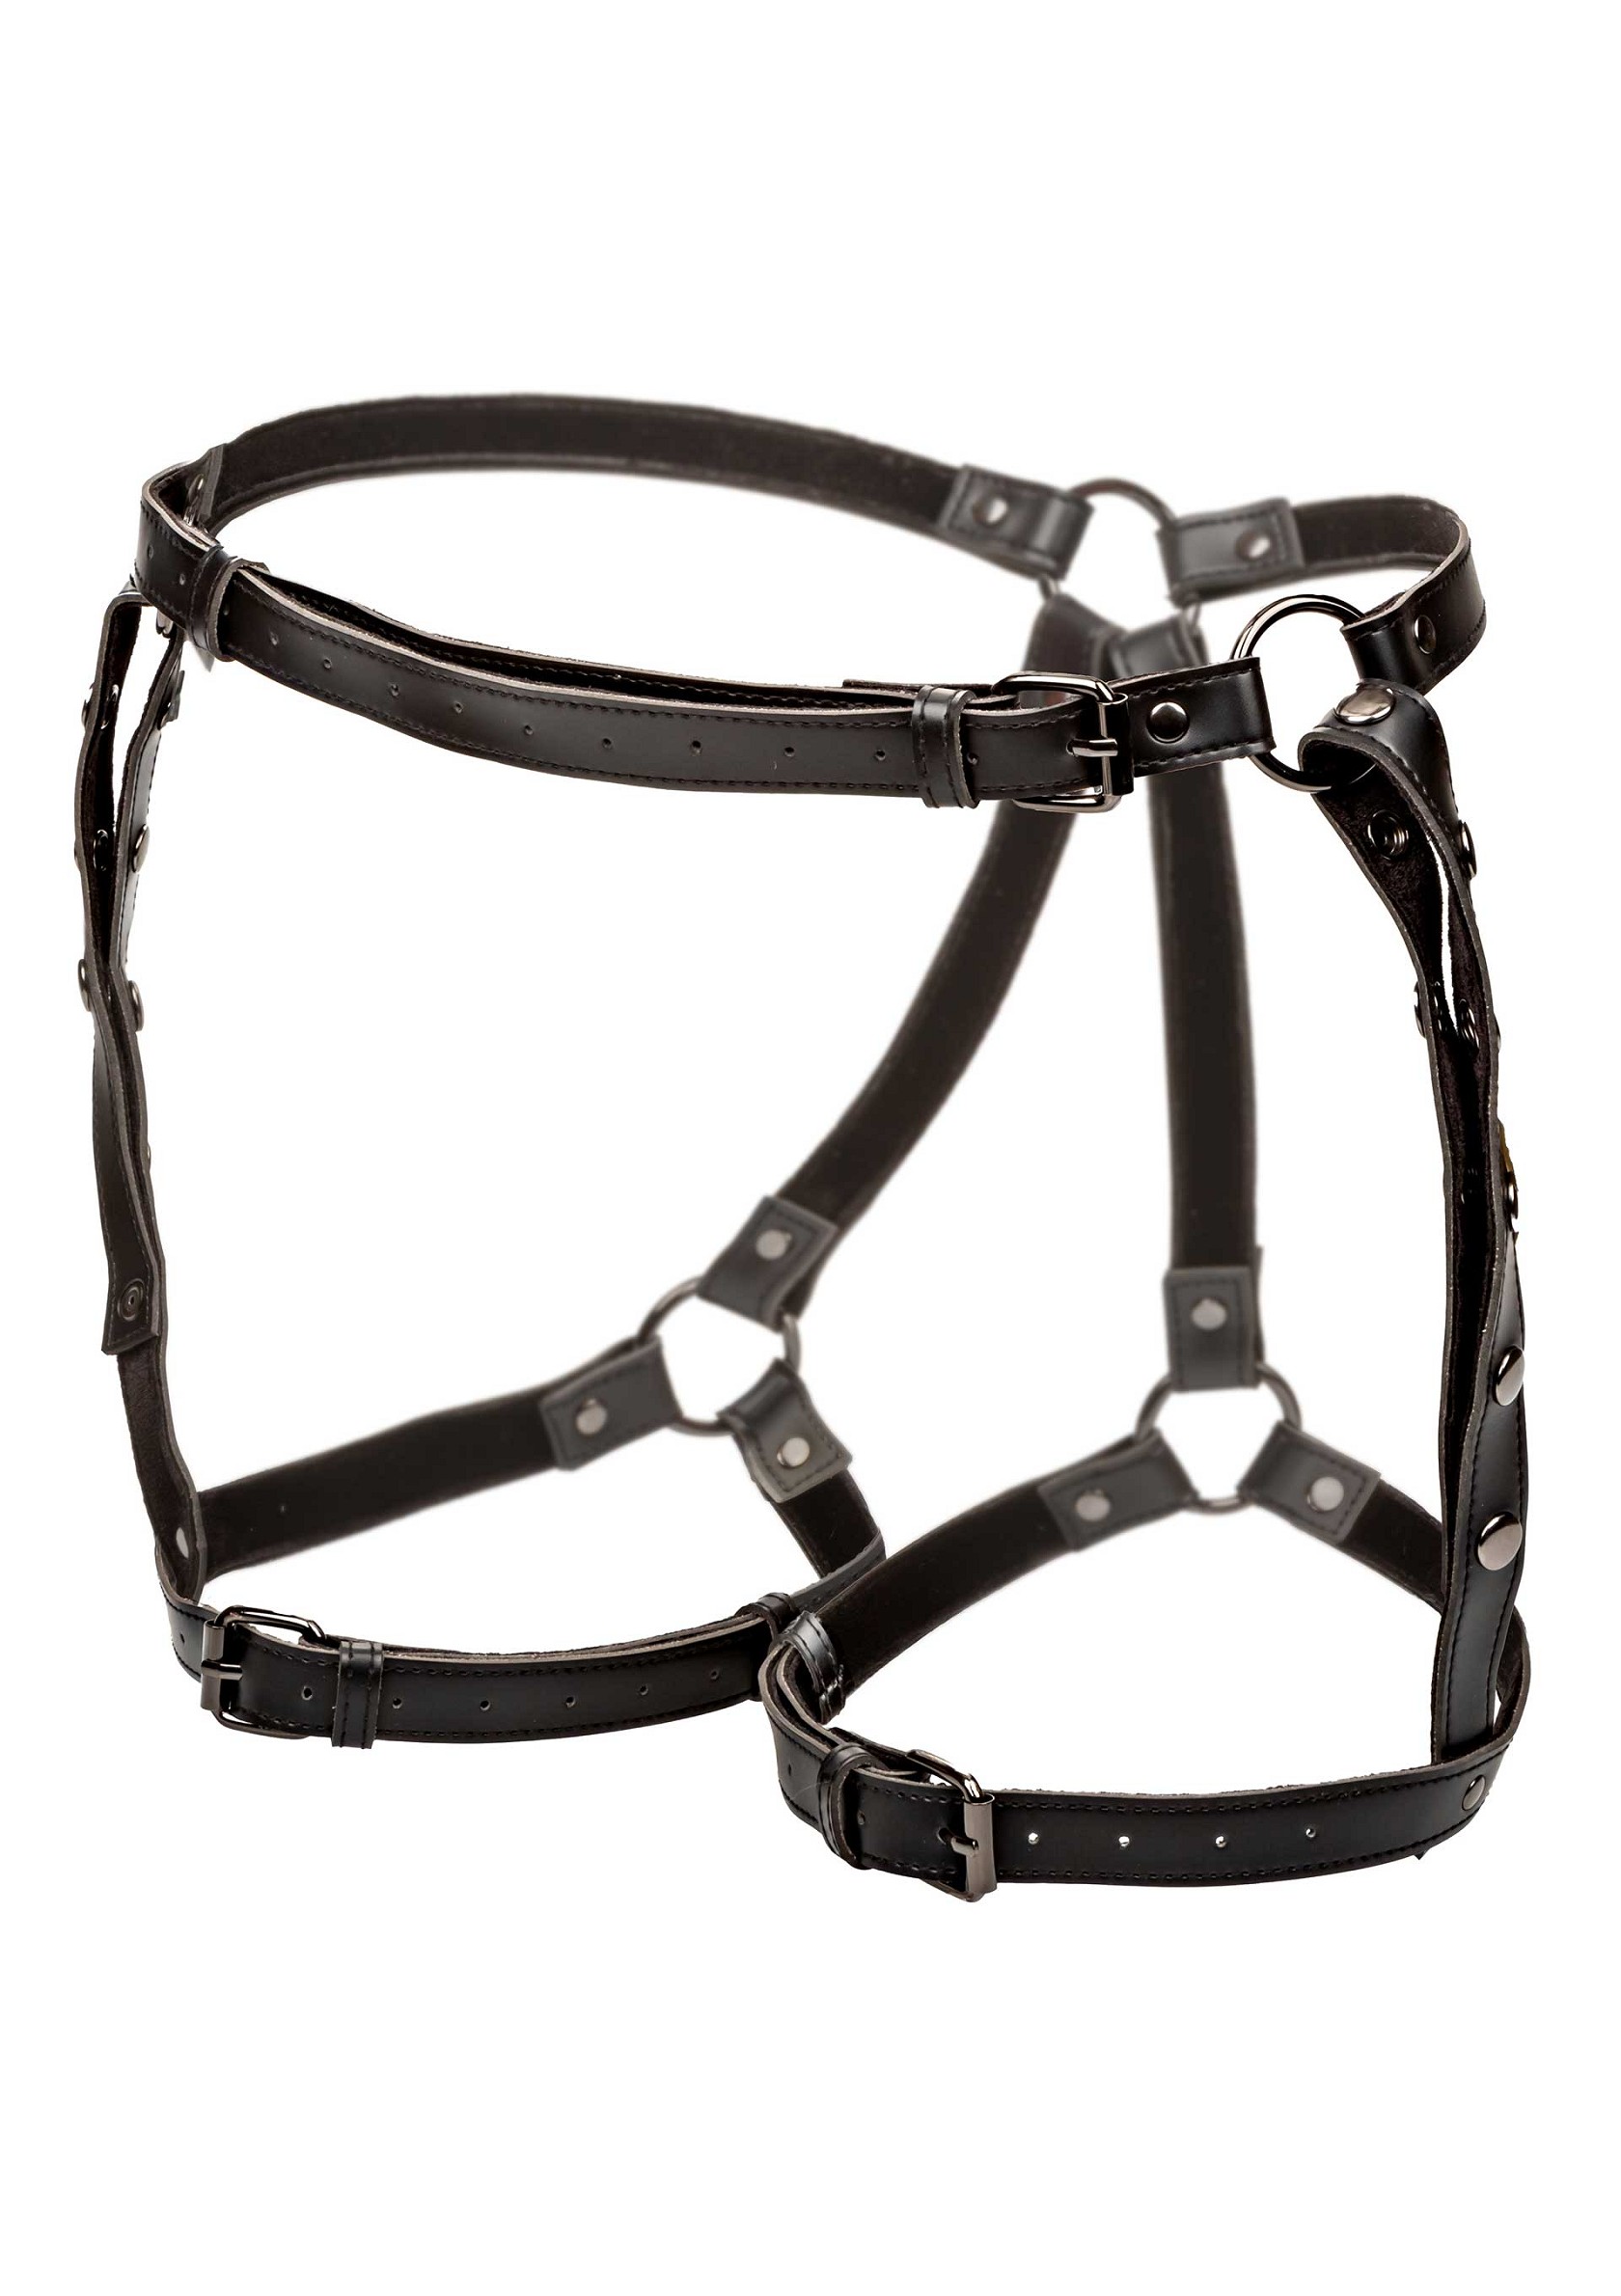 Riding Thigh Harness +Size